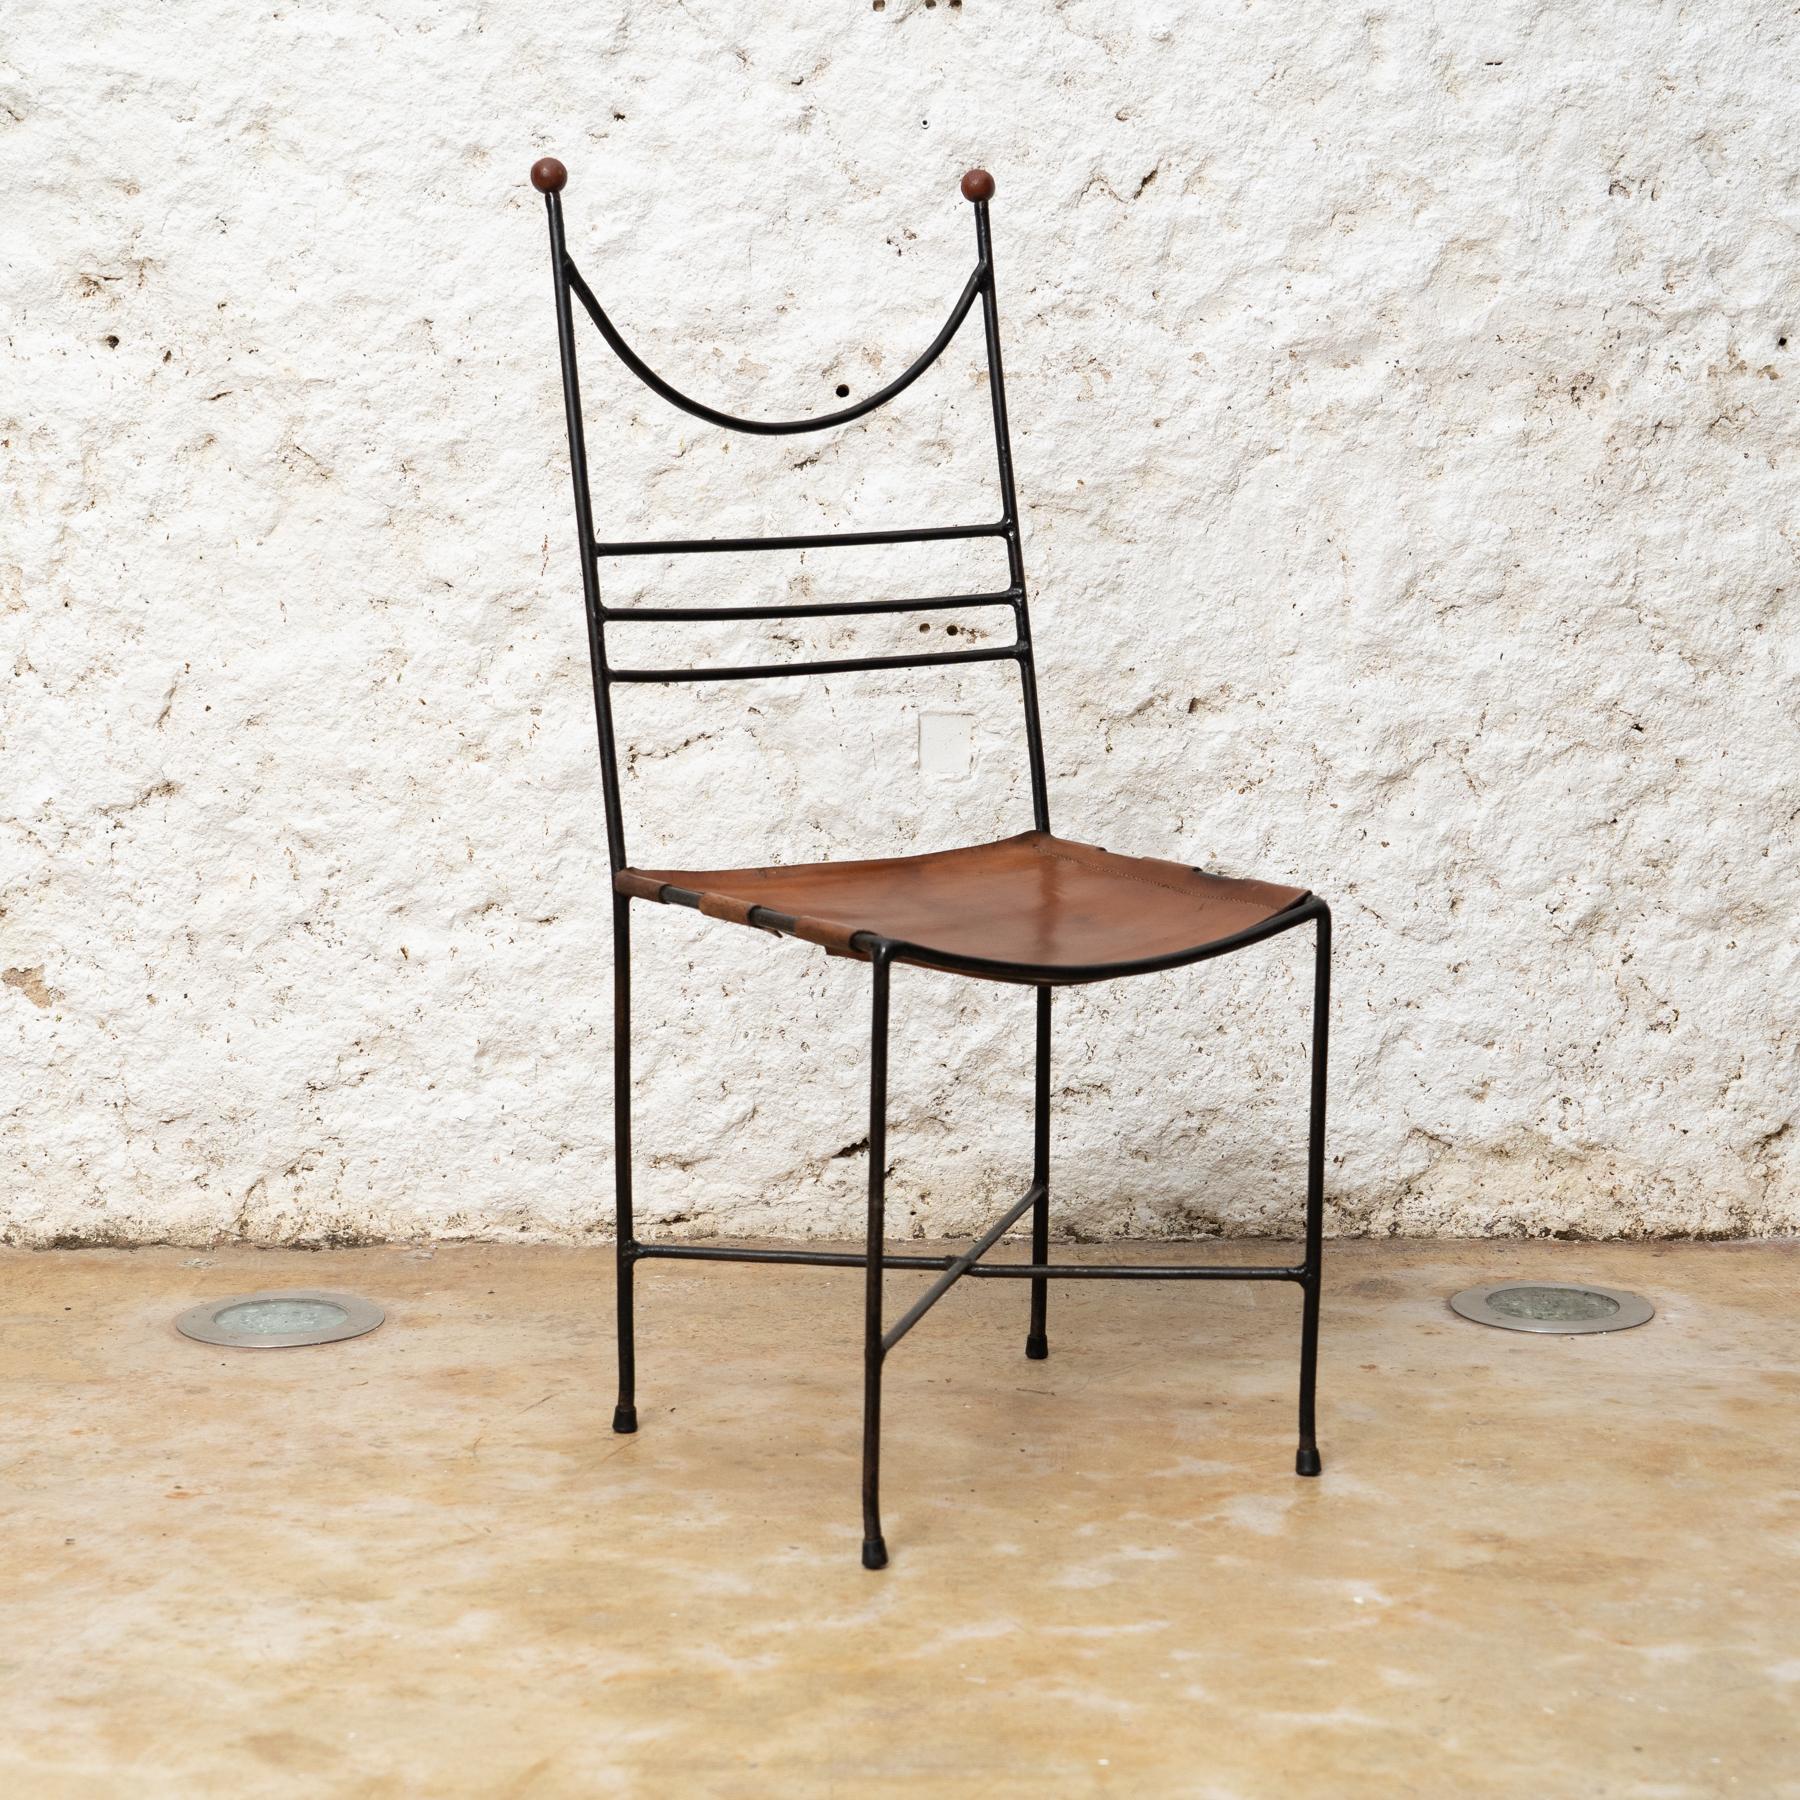 Immerse yourself in the timeless allure of mid-century modern design with the Pere Cosp Iron and Leather Chair, a sculptural masterpiece crafted in Spain around 1960. Designed by Pere Cosp, this chair seamlessly blends form and function, featuring a